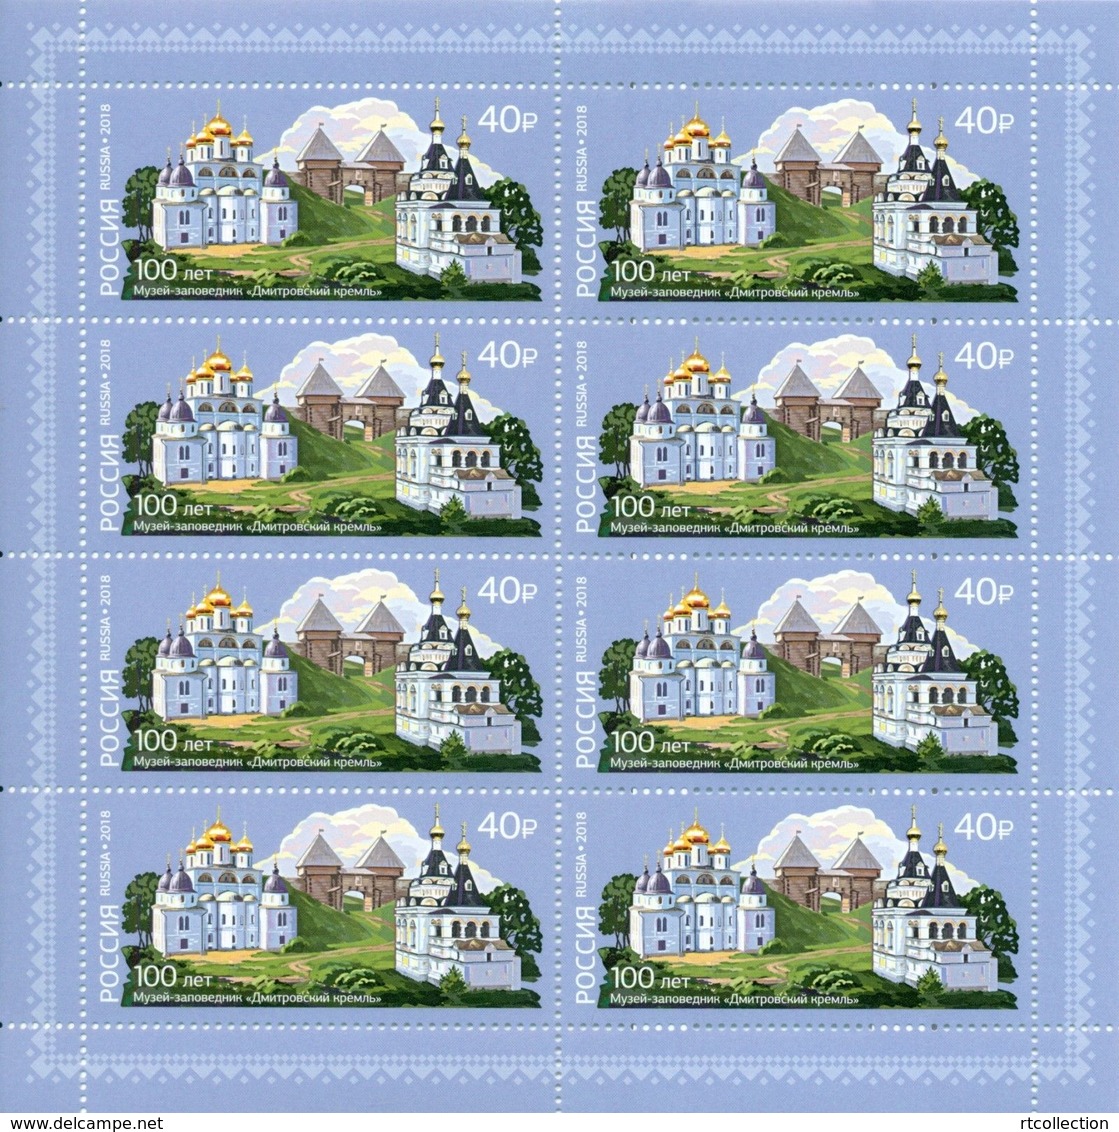 Russia 2018 Sheet Dmitrov Kremlin Museum Reserve Cathedral Church Architecture Religions Buildings Places Art Stamps MNH - Geography